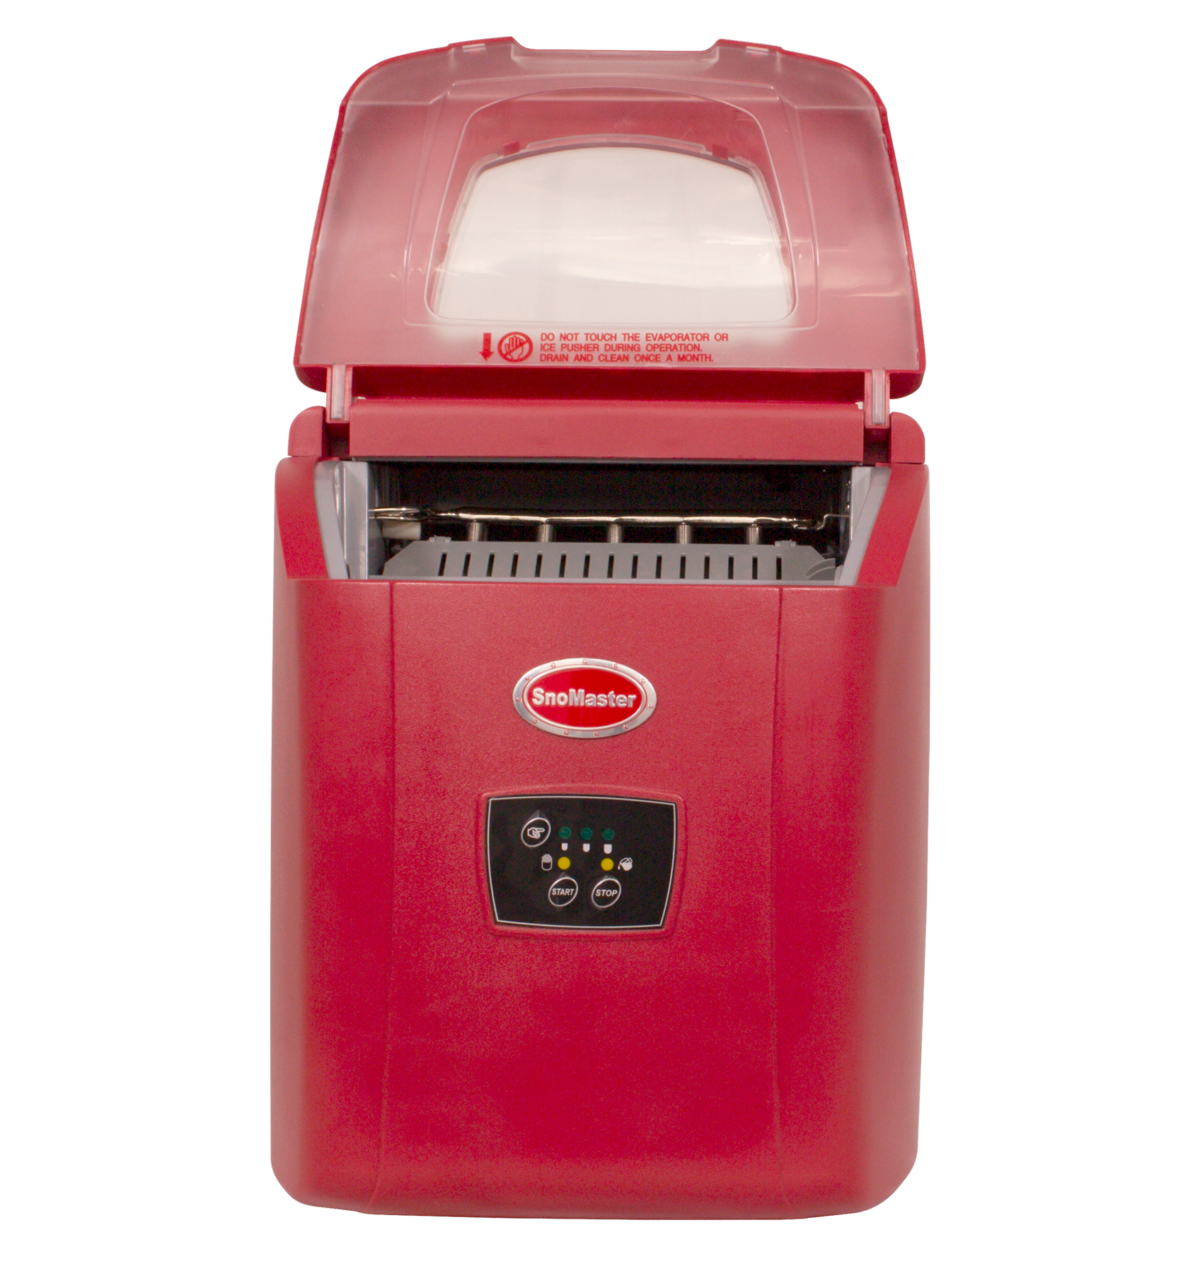 Buy online SNOMASTER (ZB-14R) 12KG TABLETOP ICE MAKER RETRO RED at low  price & get delivery worldwide